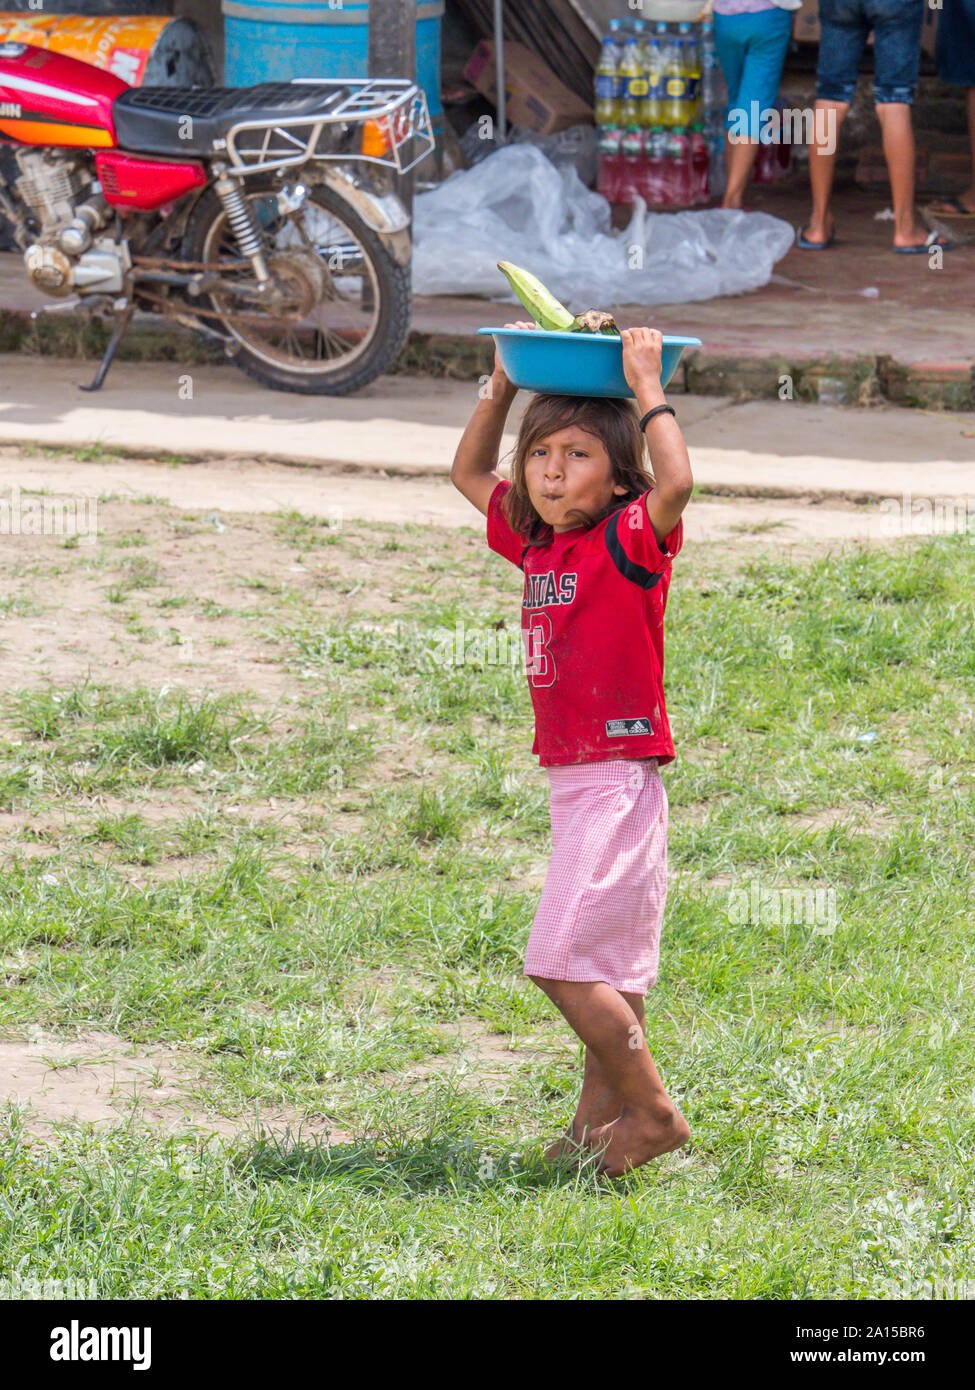 Small village by Amazon River, Peru - Dec 03, 2018: Child labor. Small girl selling the fruits on the bank of Amazon river Stock Photo